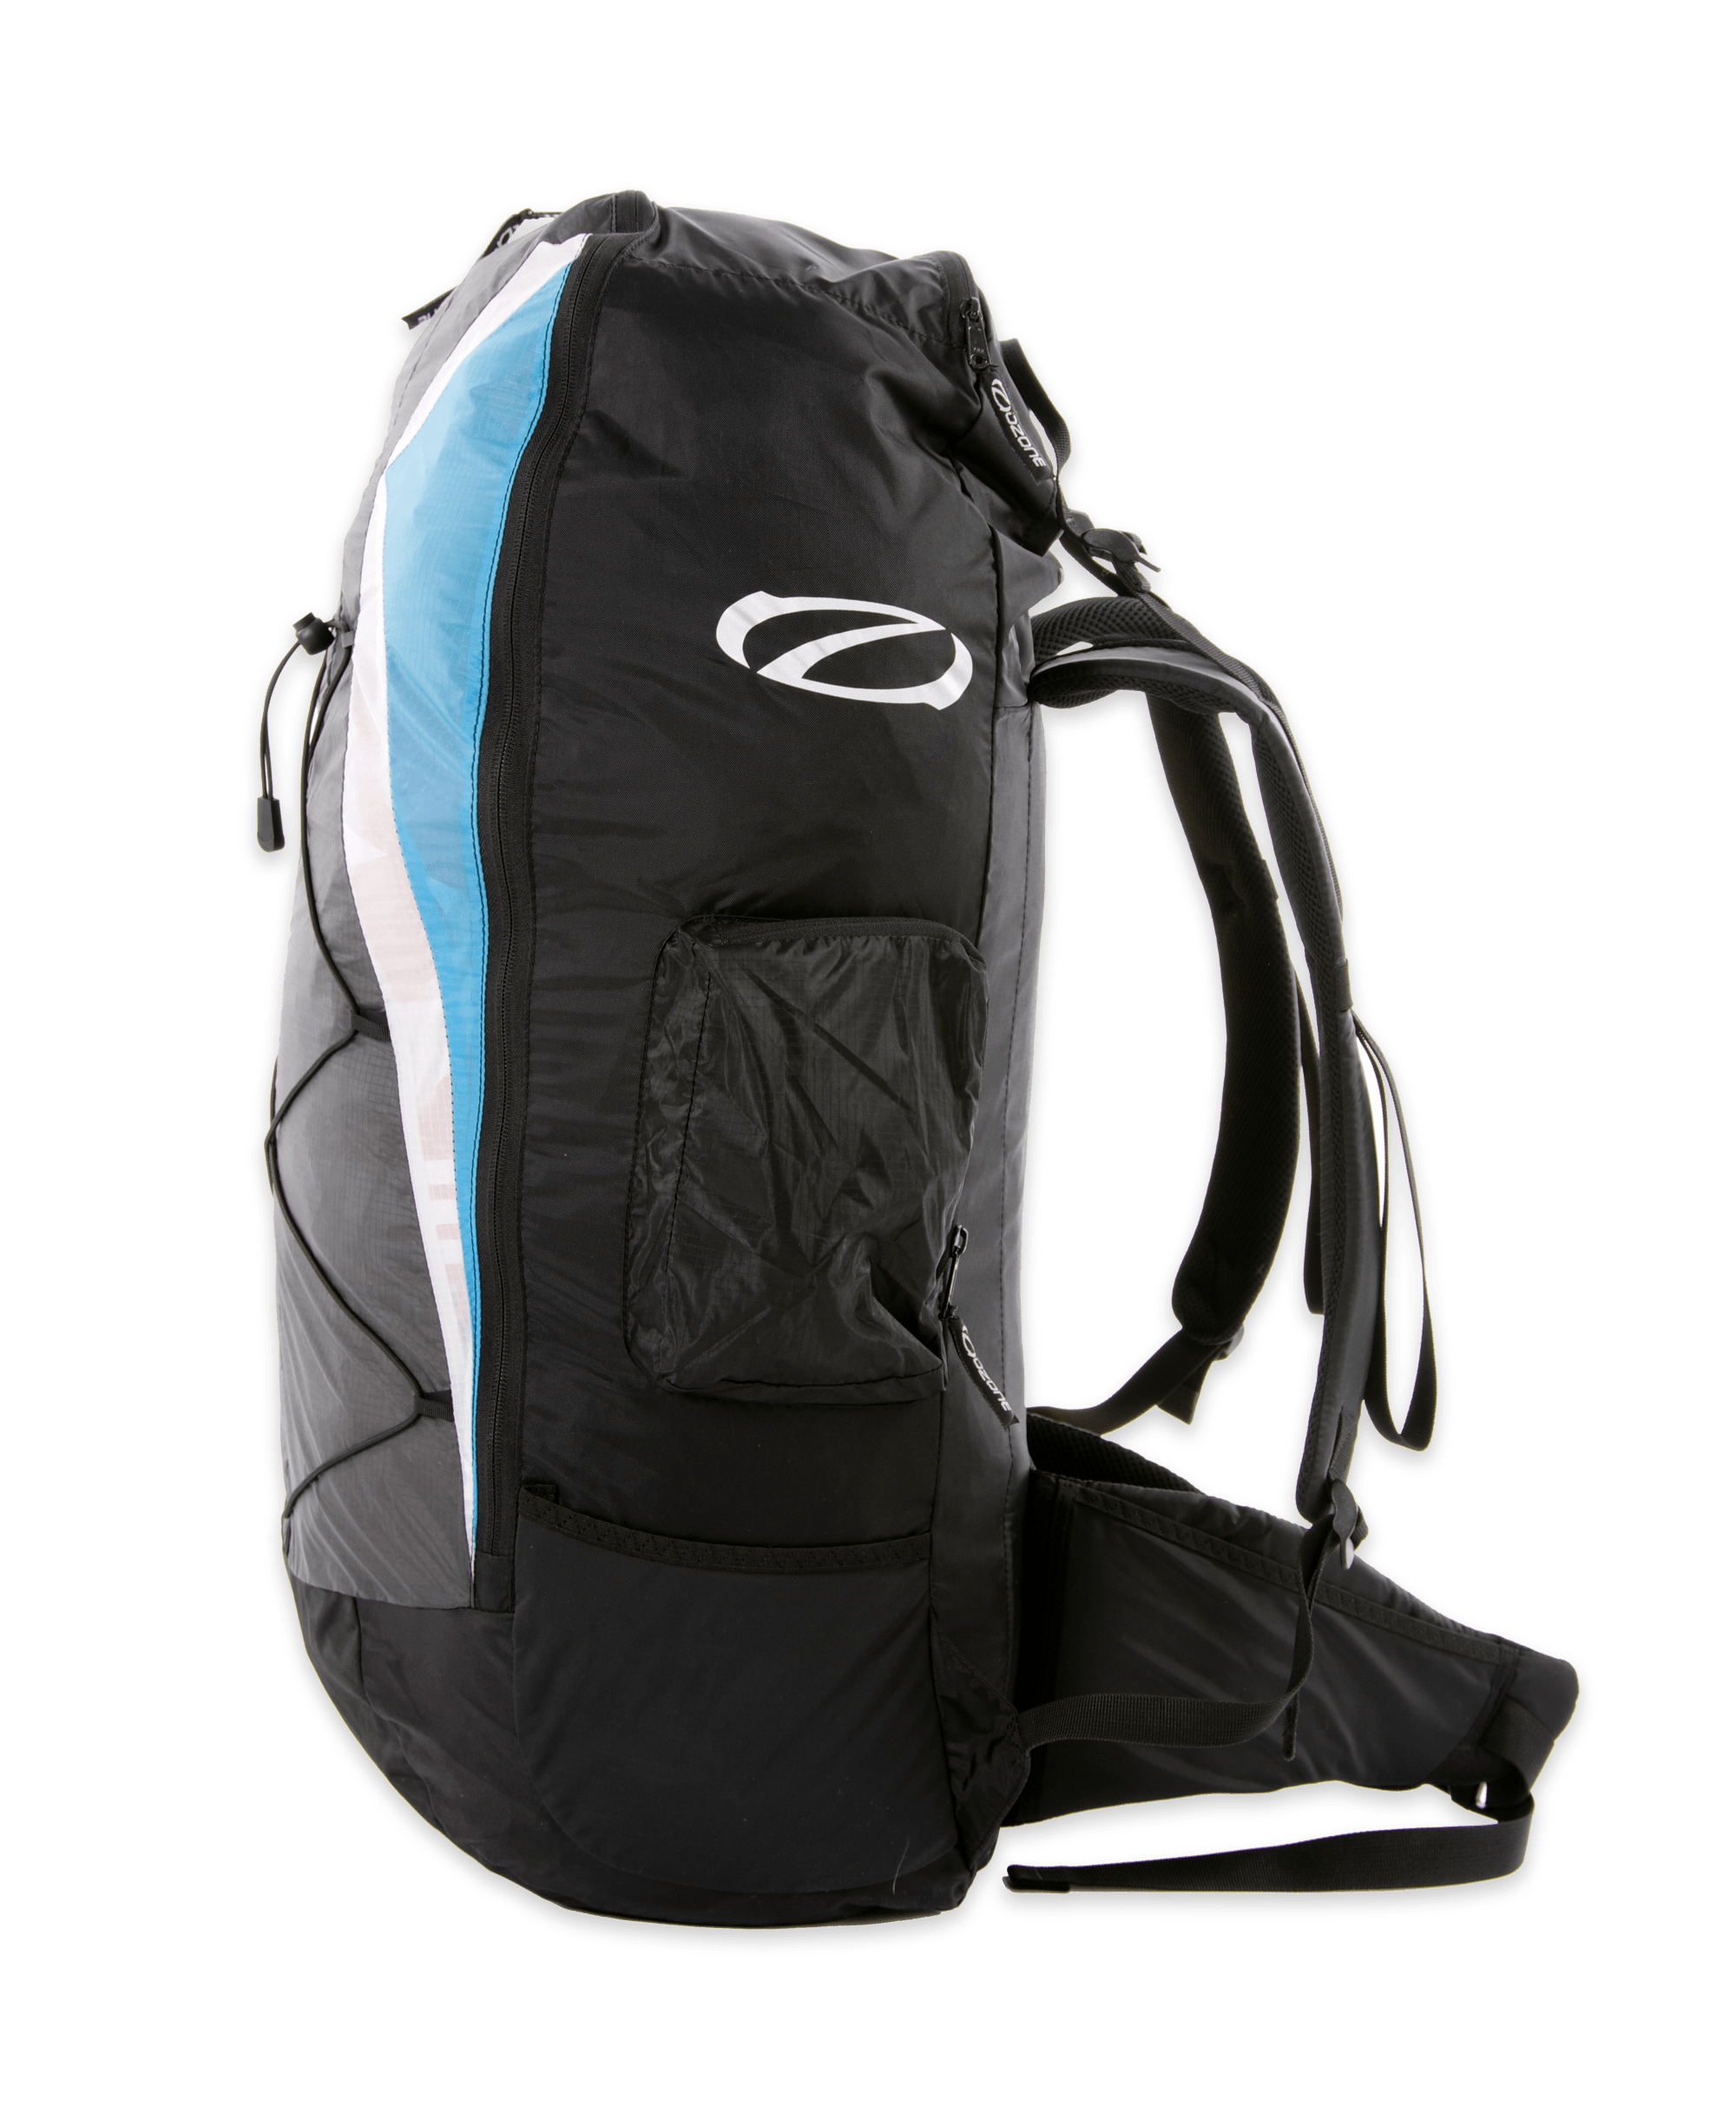 X-Alps Backpack  Ozone Paragliders